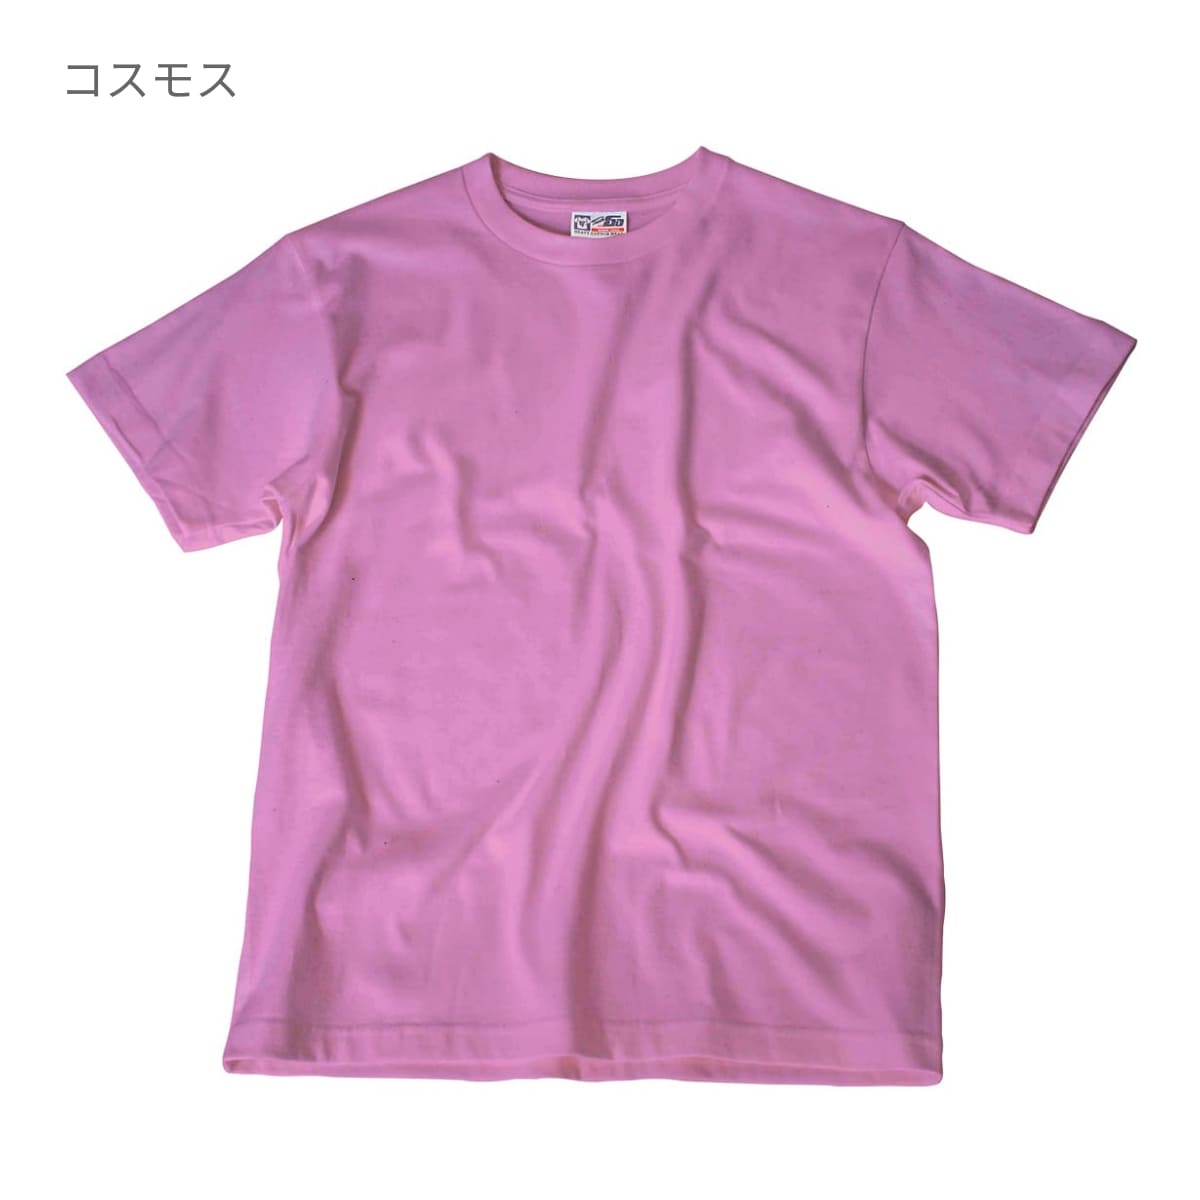 Touch and Go Ｔシャツ | キッズ | 1枚 | SS1030 | ブルークレール